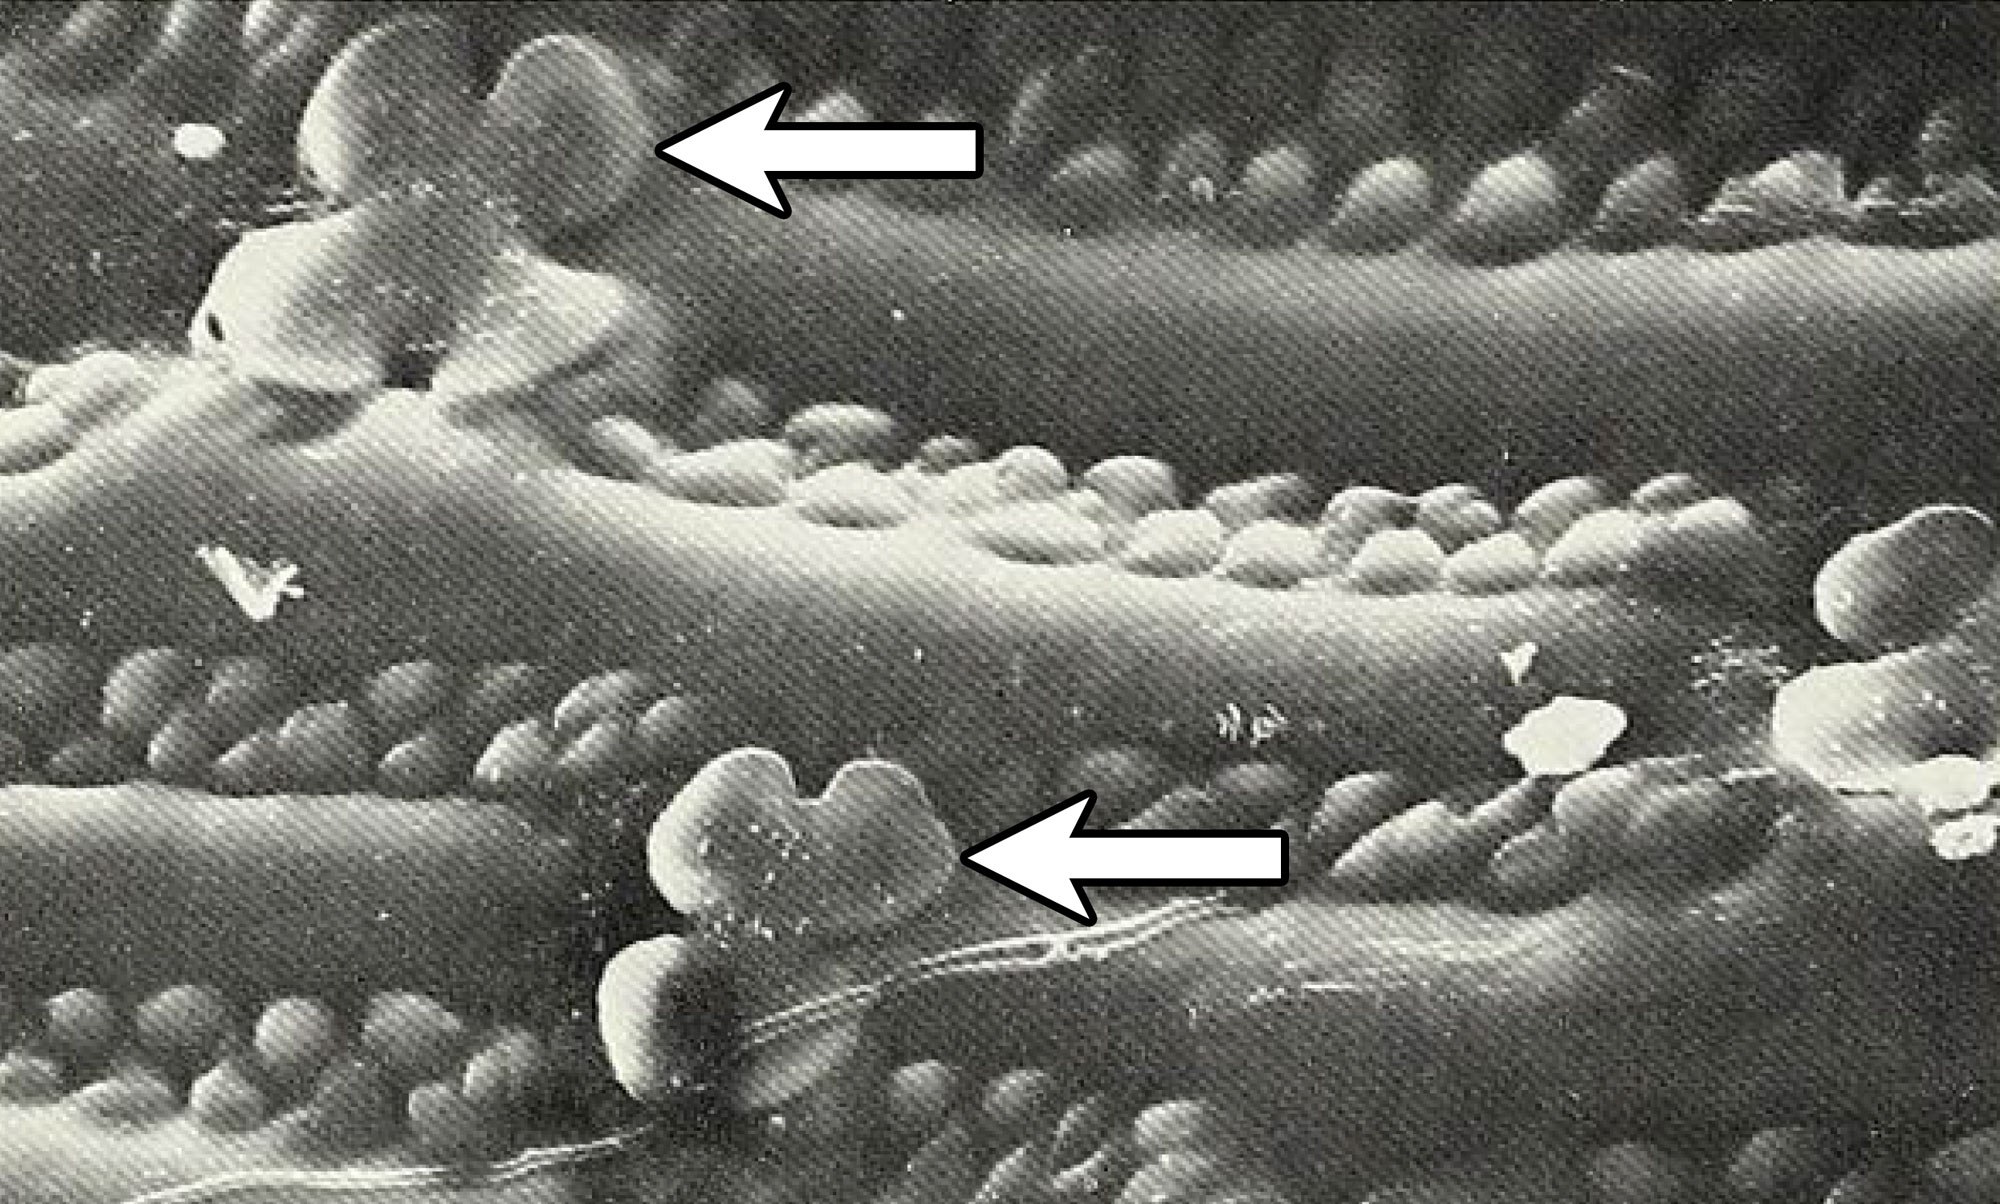 Grayscale scanning electron photomicrograph of the epidermis of the African grass Phacelurus huillensis showing silica bodies or phytoliths. The silica bodies are cross-shaped, with four rounded lobes.